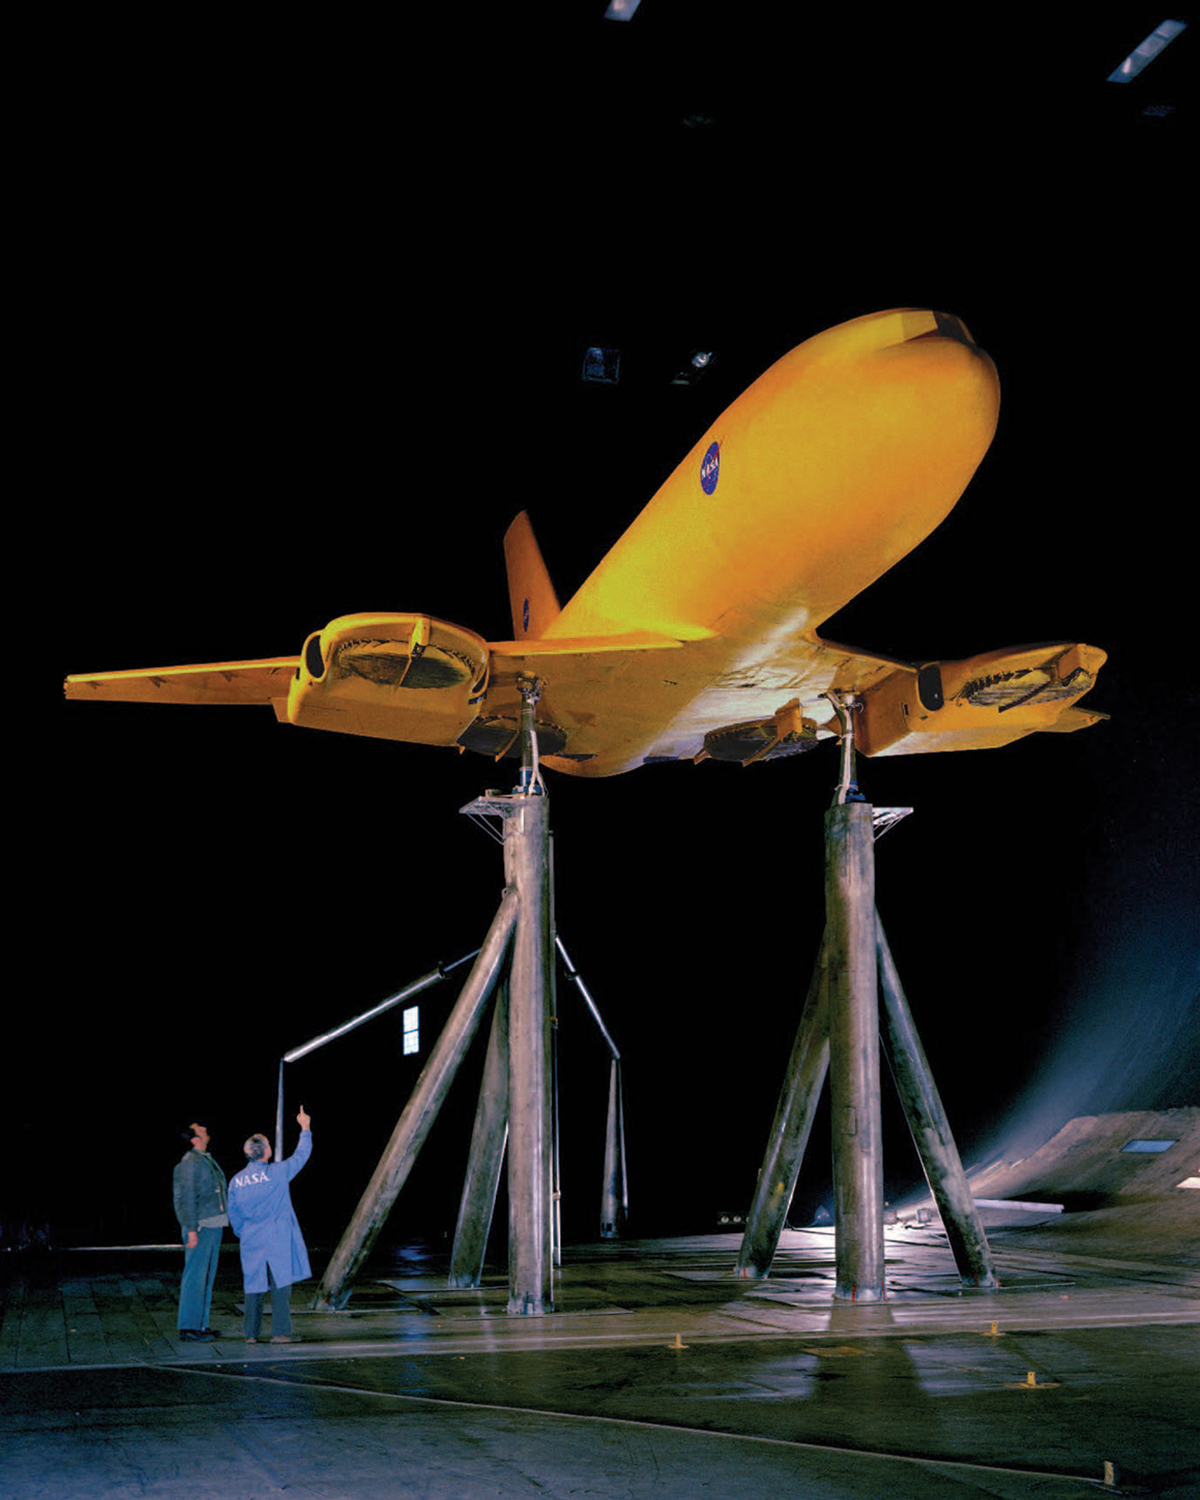 Two men look up at a yellow aircraft with a thin fan element attached to each wing, which is raised above the floor on tall columns inside a wind tunnel.